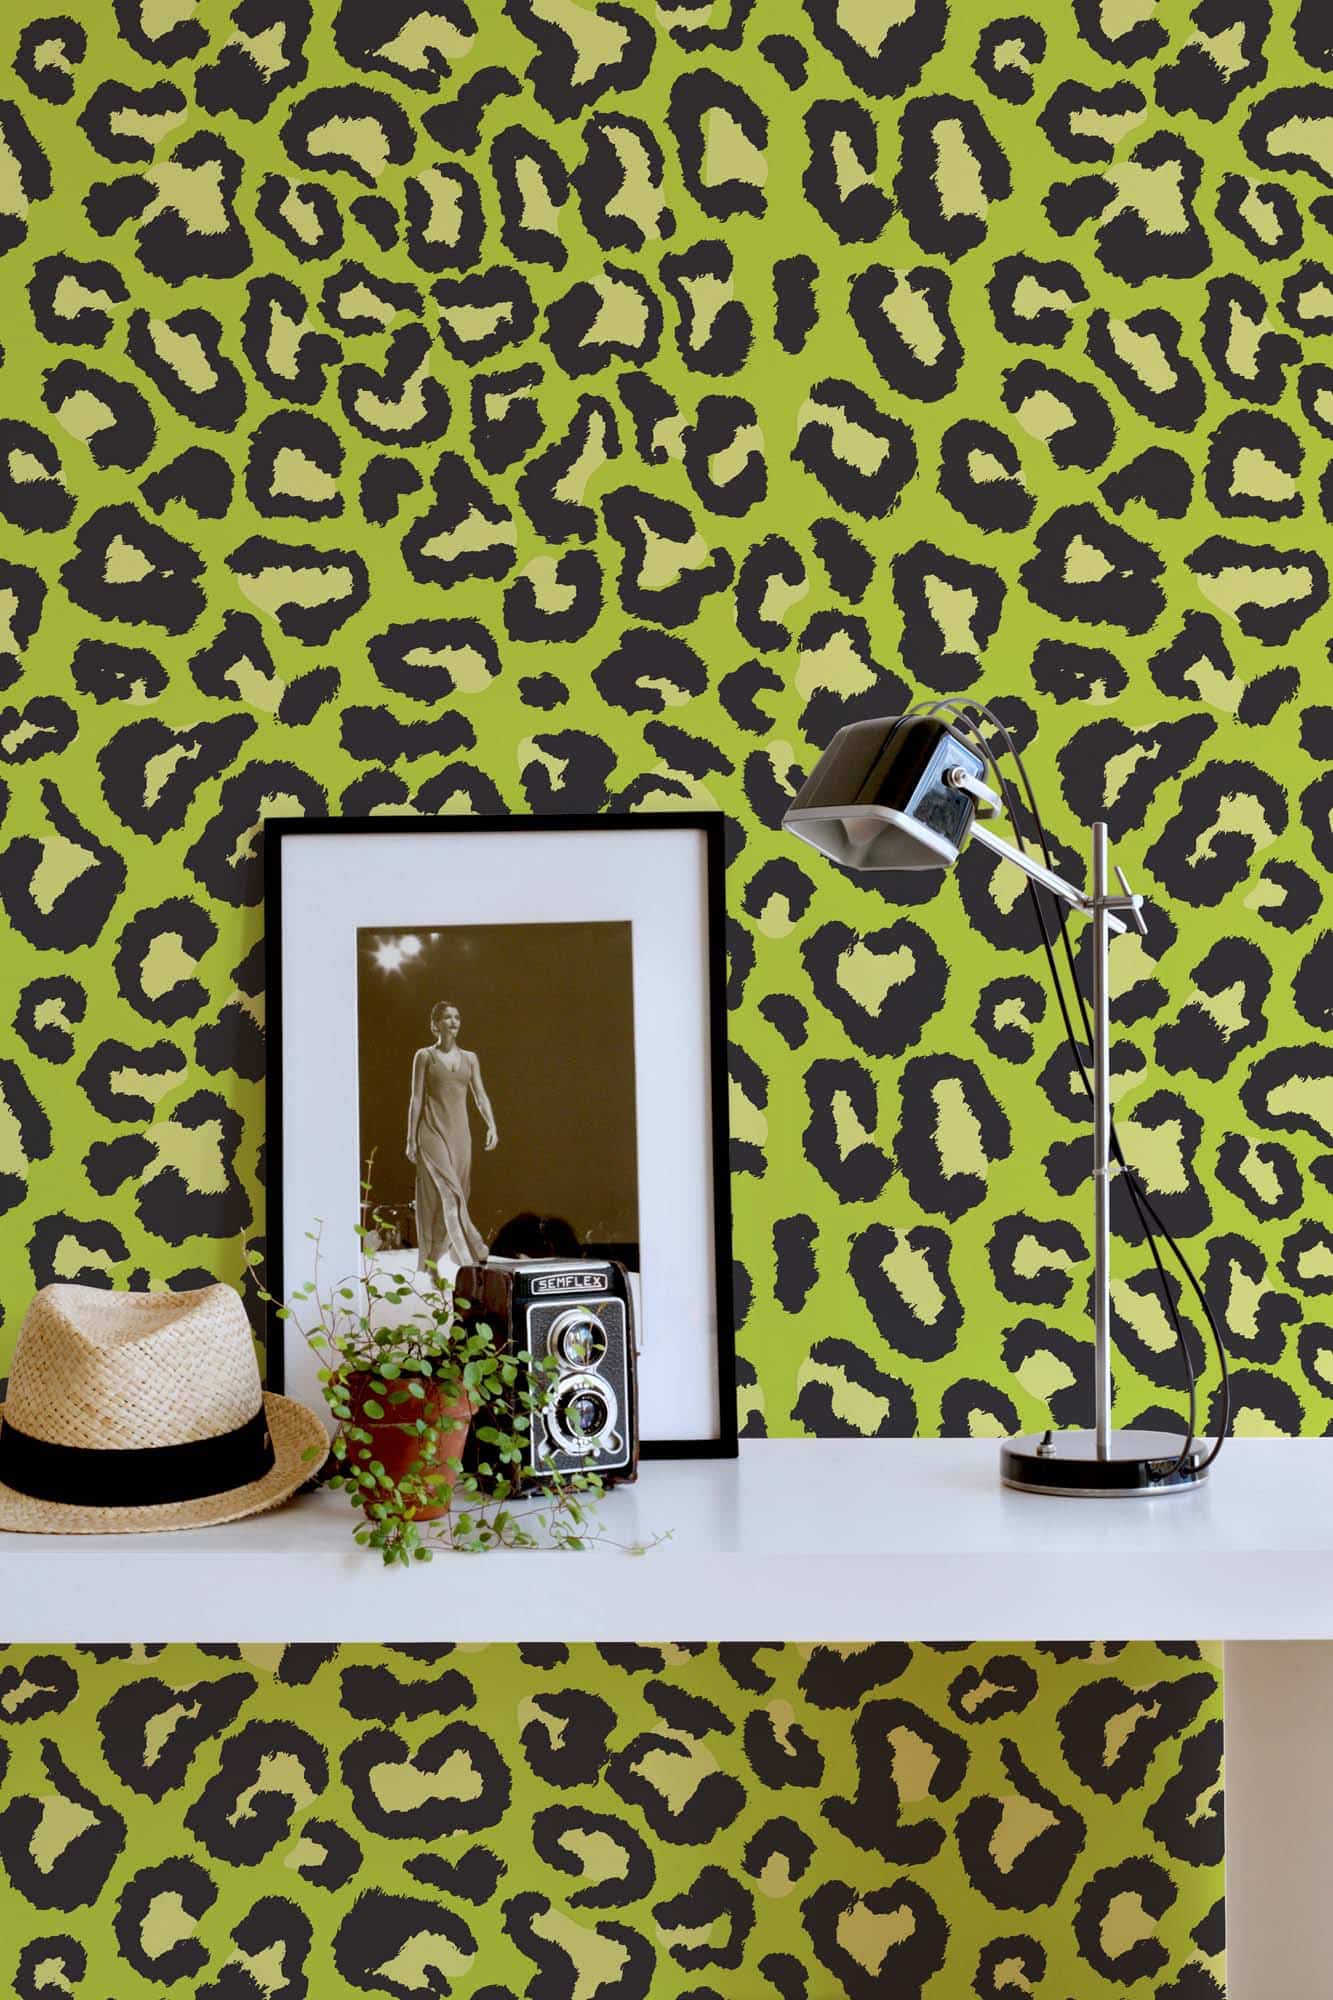 Green leopard pattern wallpaper - Peel and Stick or Non-Pasted